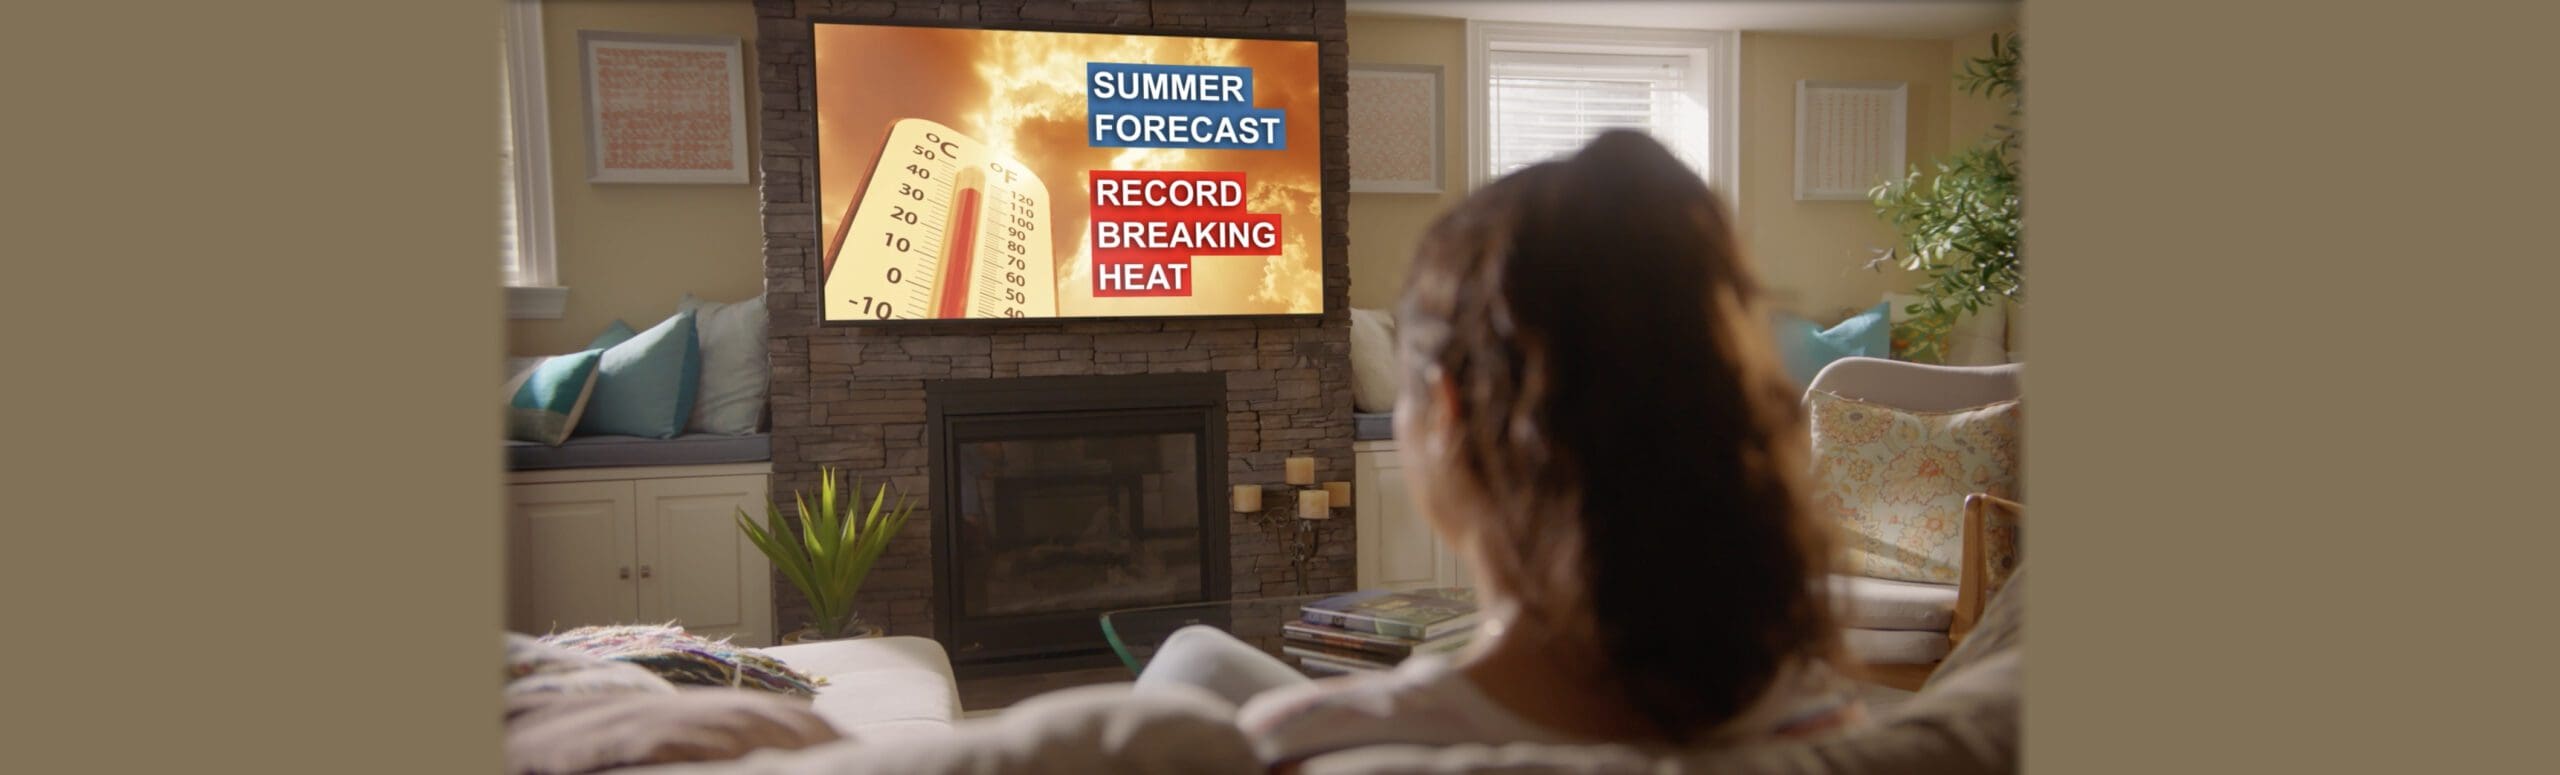 Summer forecast - Record breaking heat on tv with woman sitting on couch at home